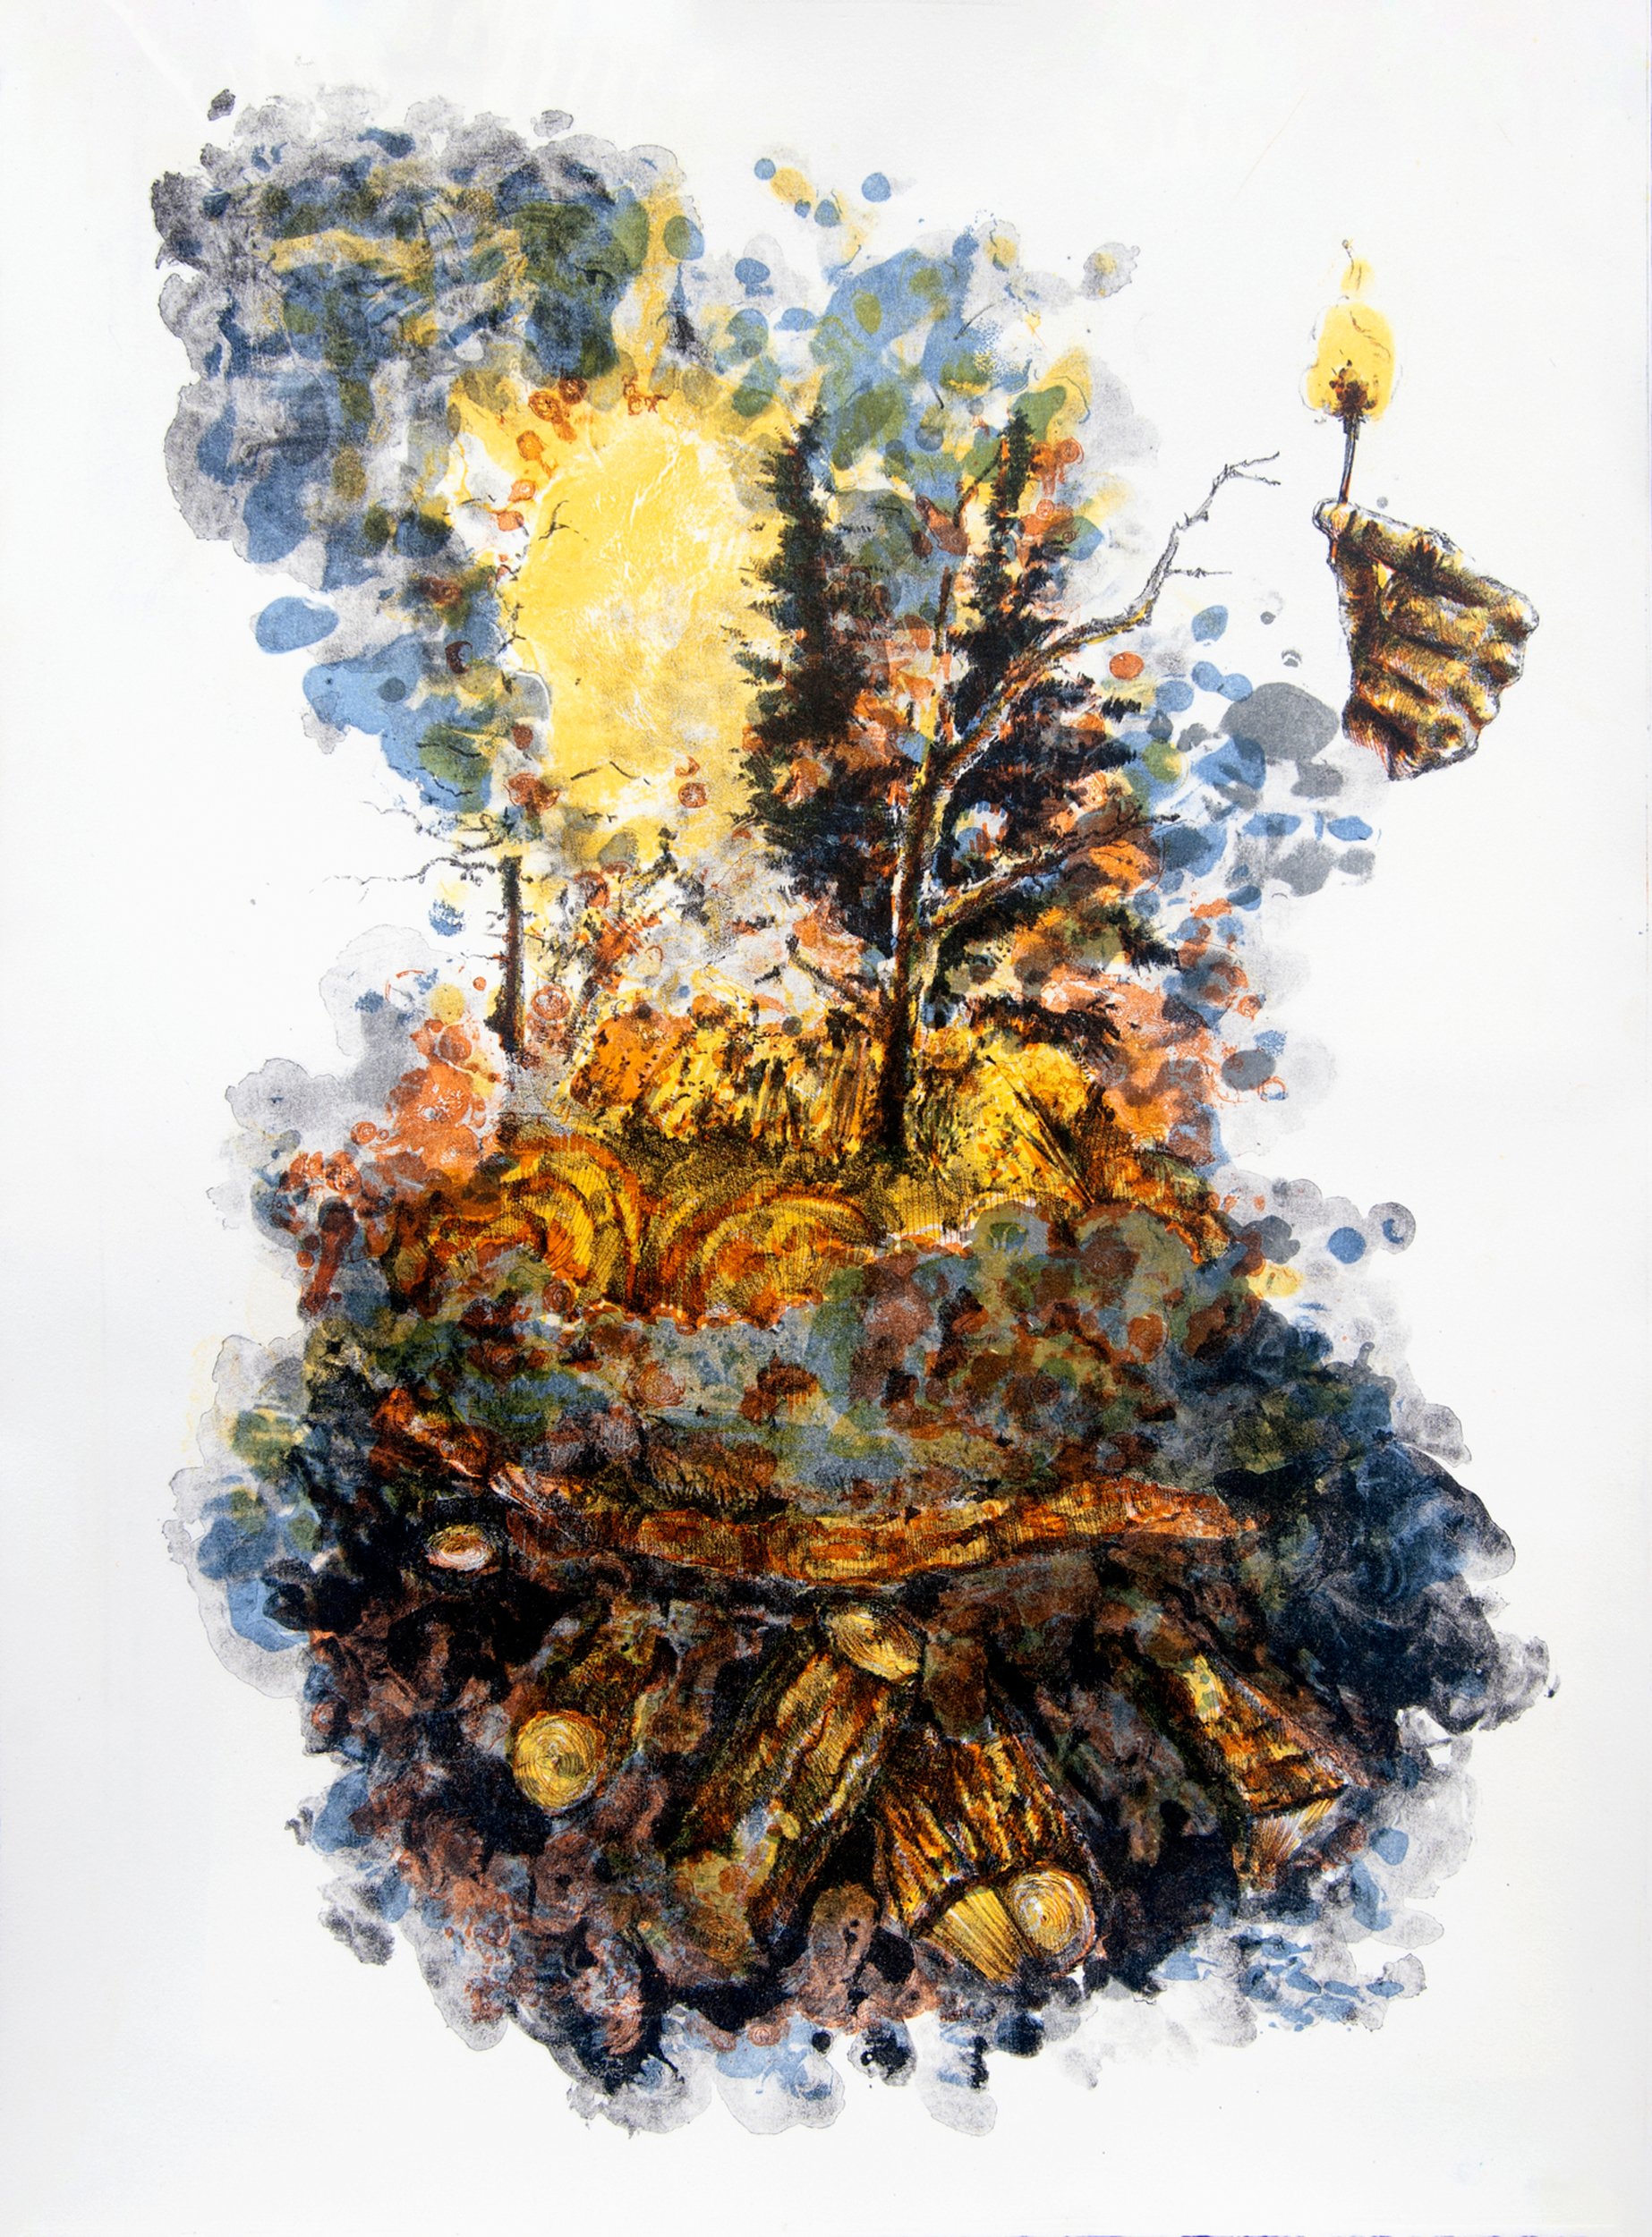  Patrick Vincent    This Island is on Fire    Lithography 